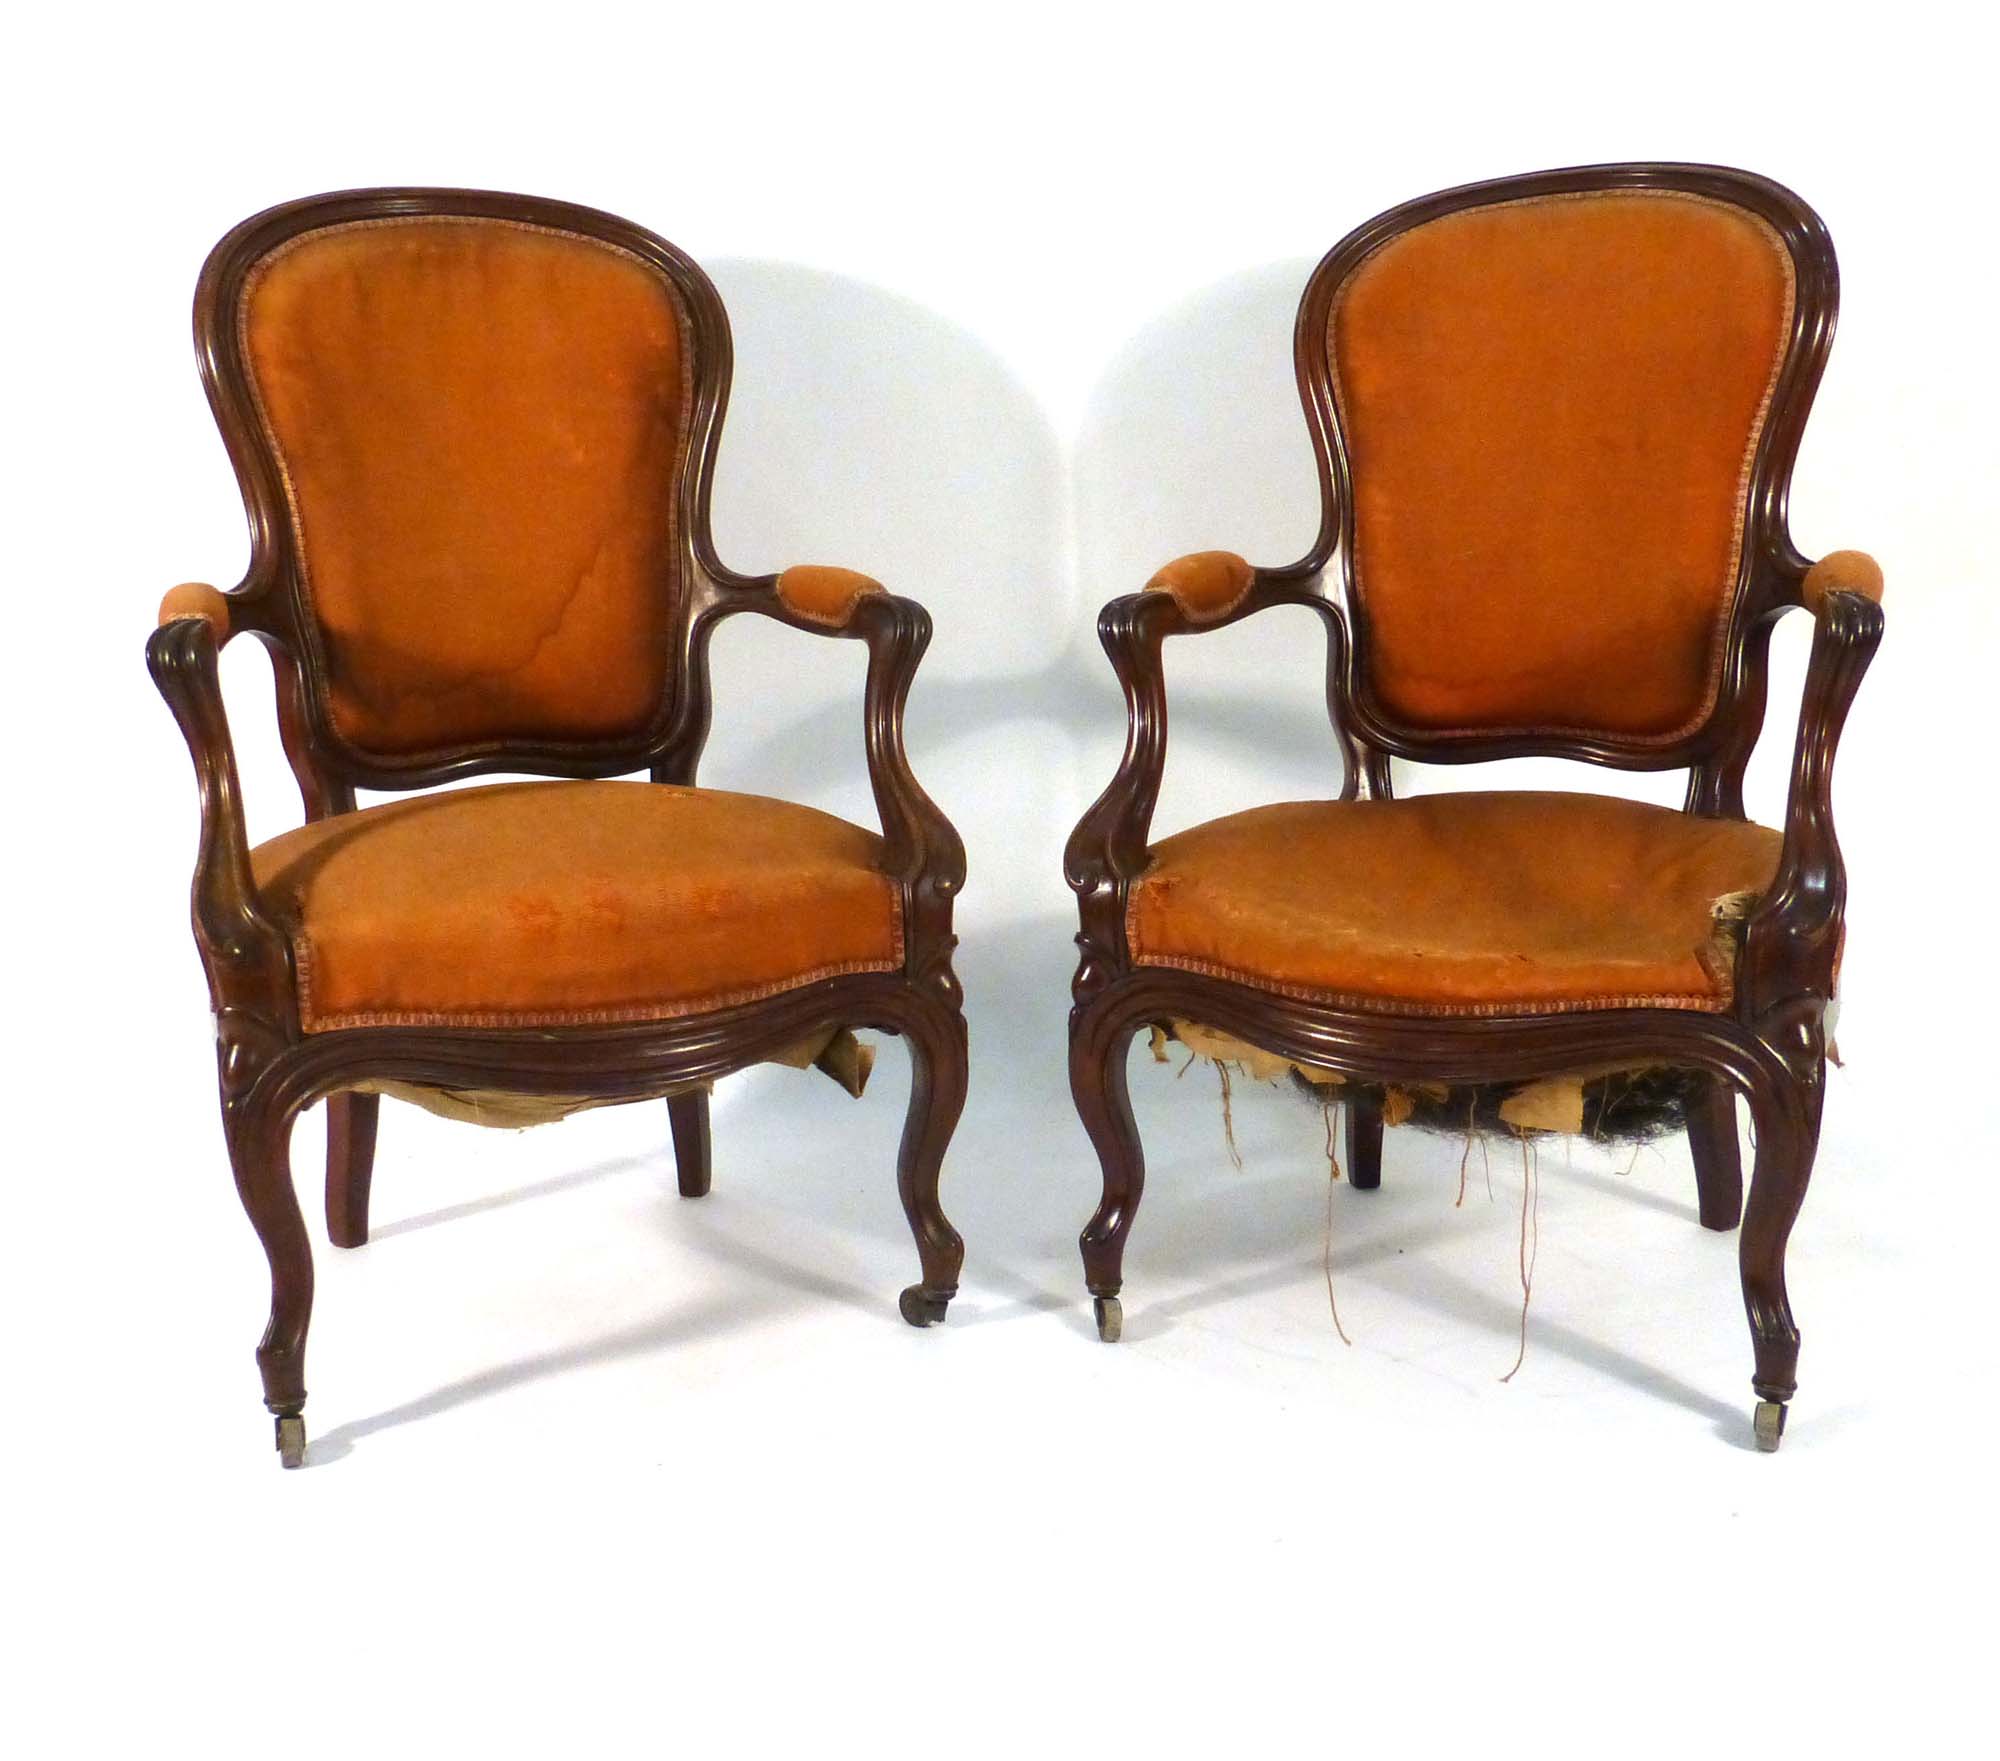 A pair of 19th century French mahogany and upholstered open armchairs on cabriole legs with castors